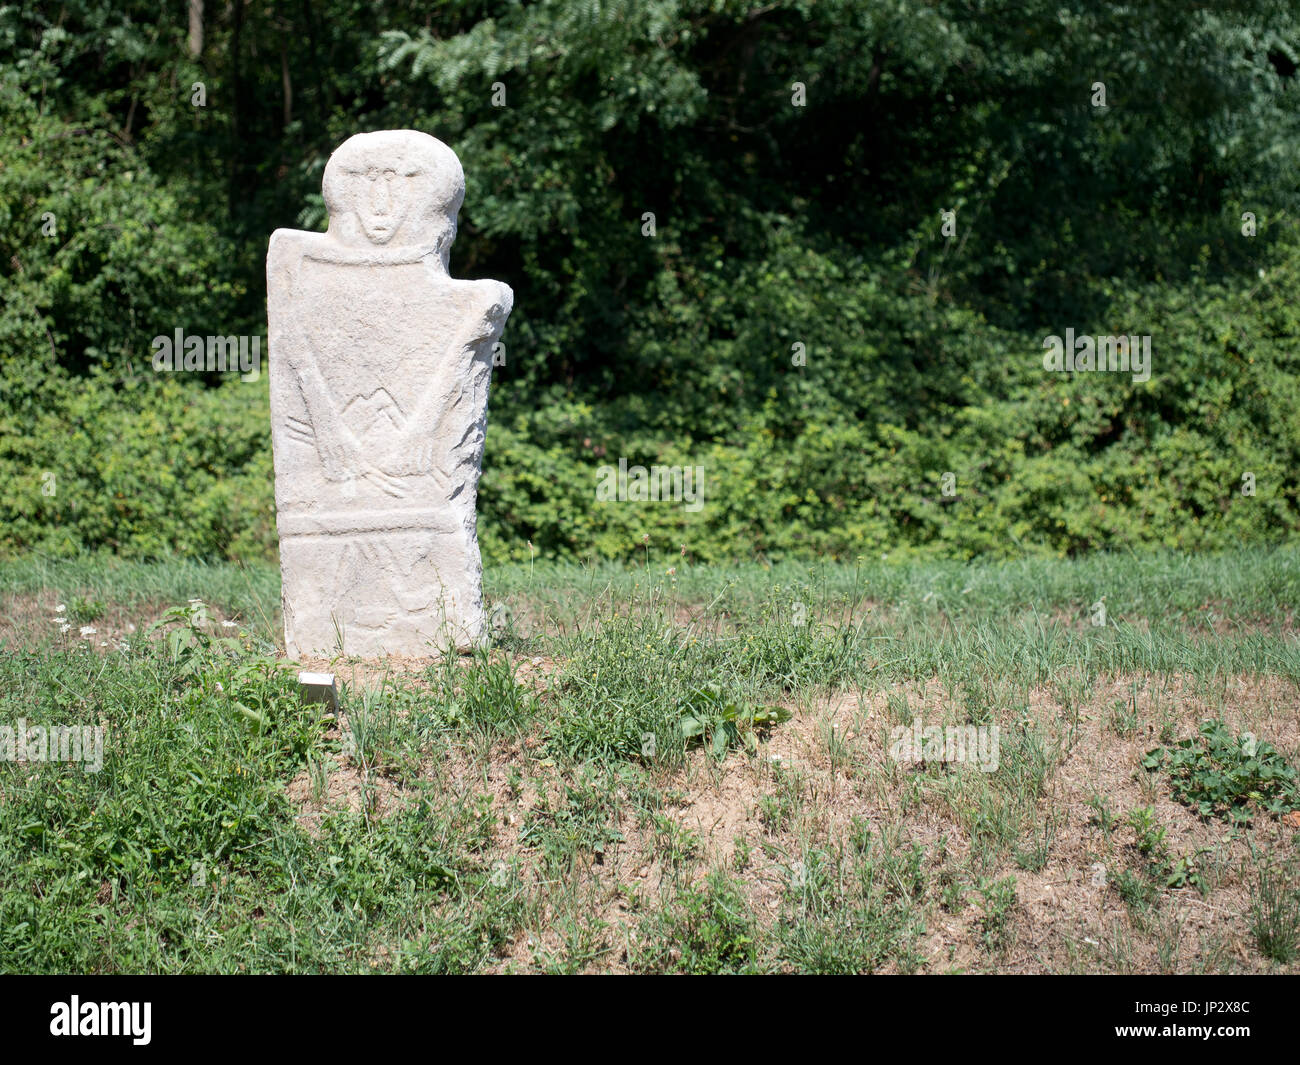 Statua stele. Replica. Example of ancient carved stones, typical of the area. Outside Pieve di Sorano church. Stock Photo